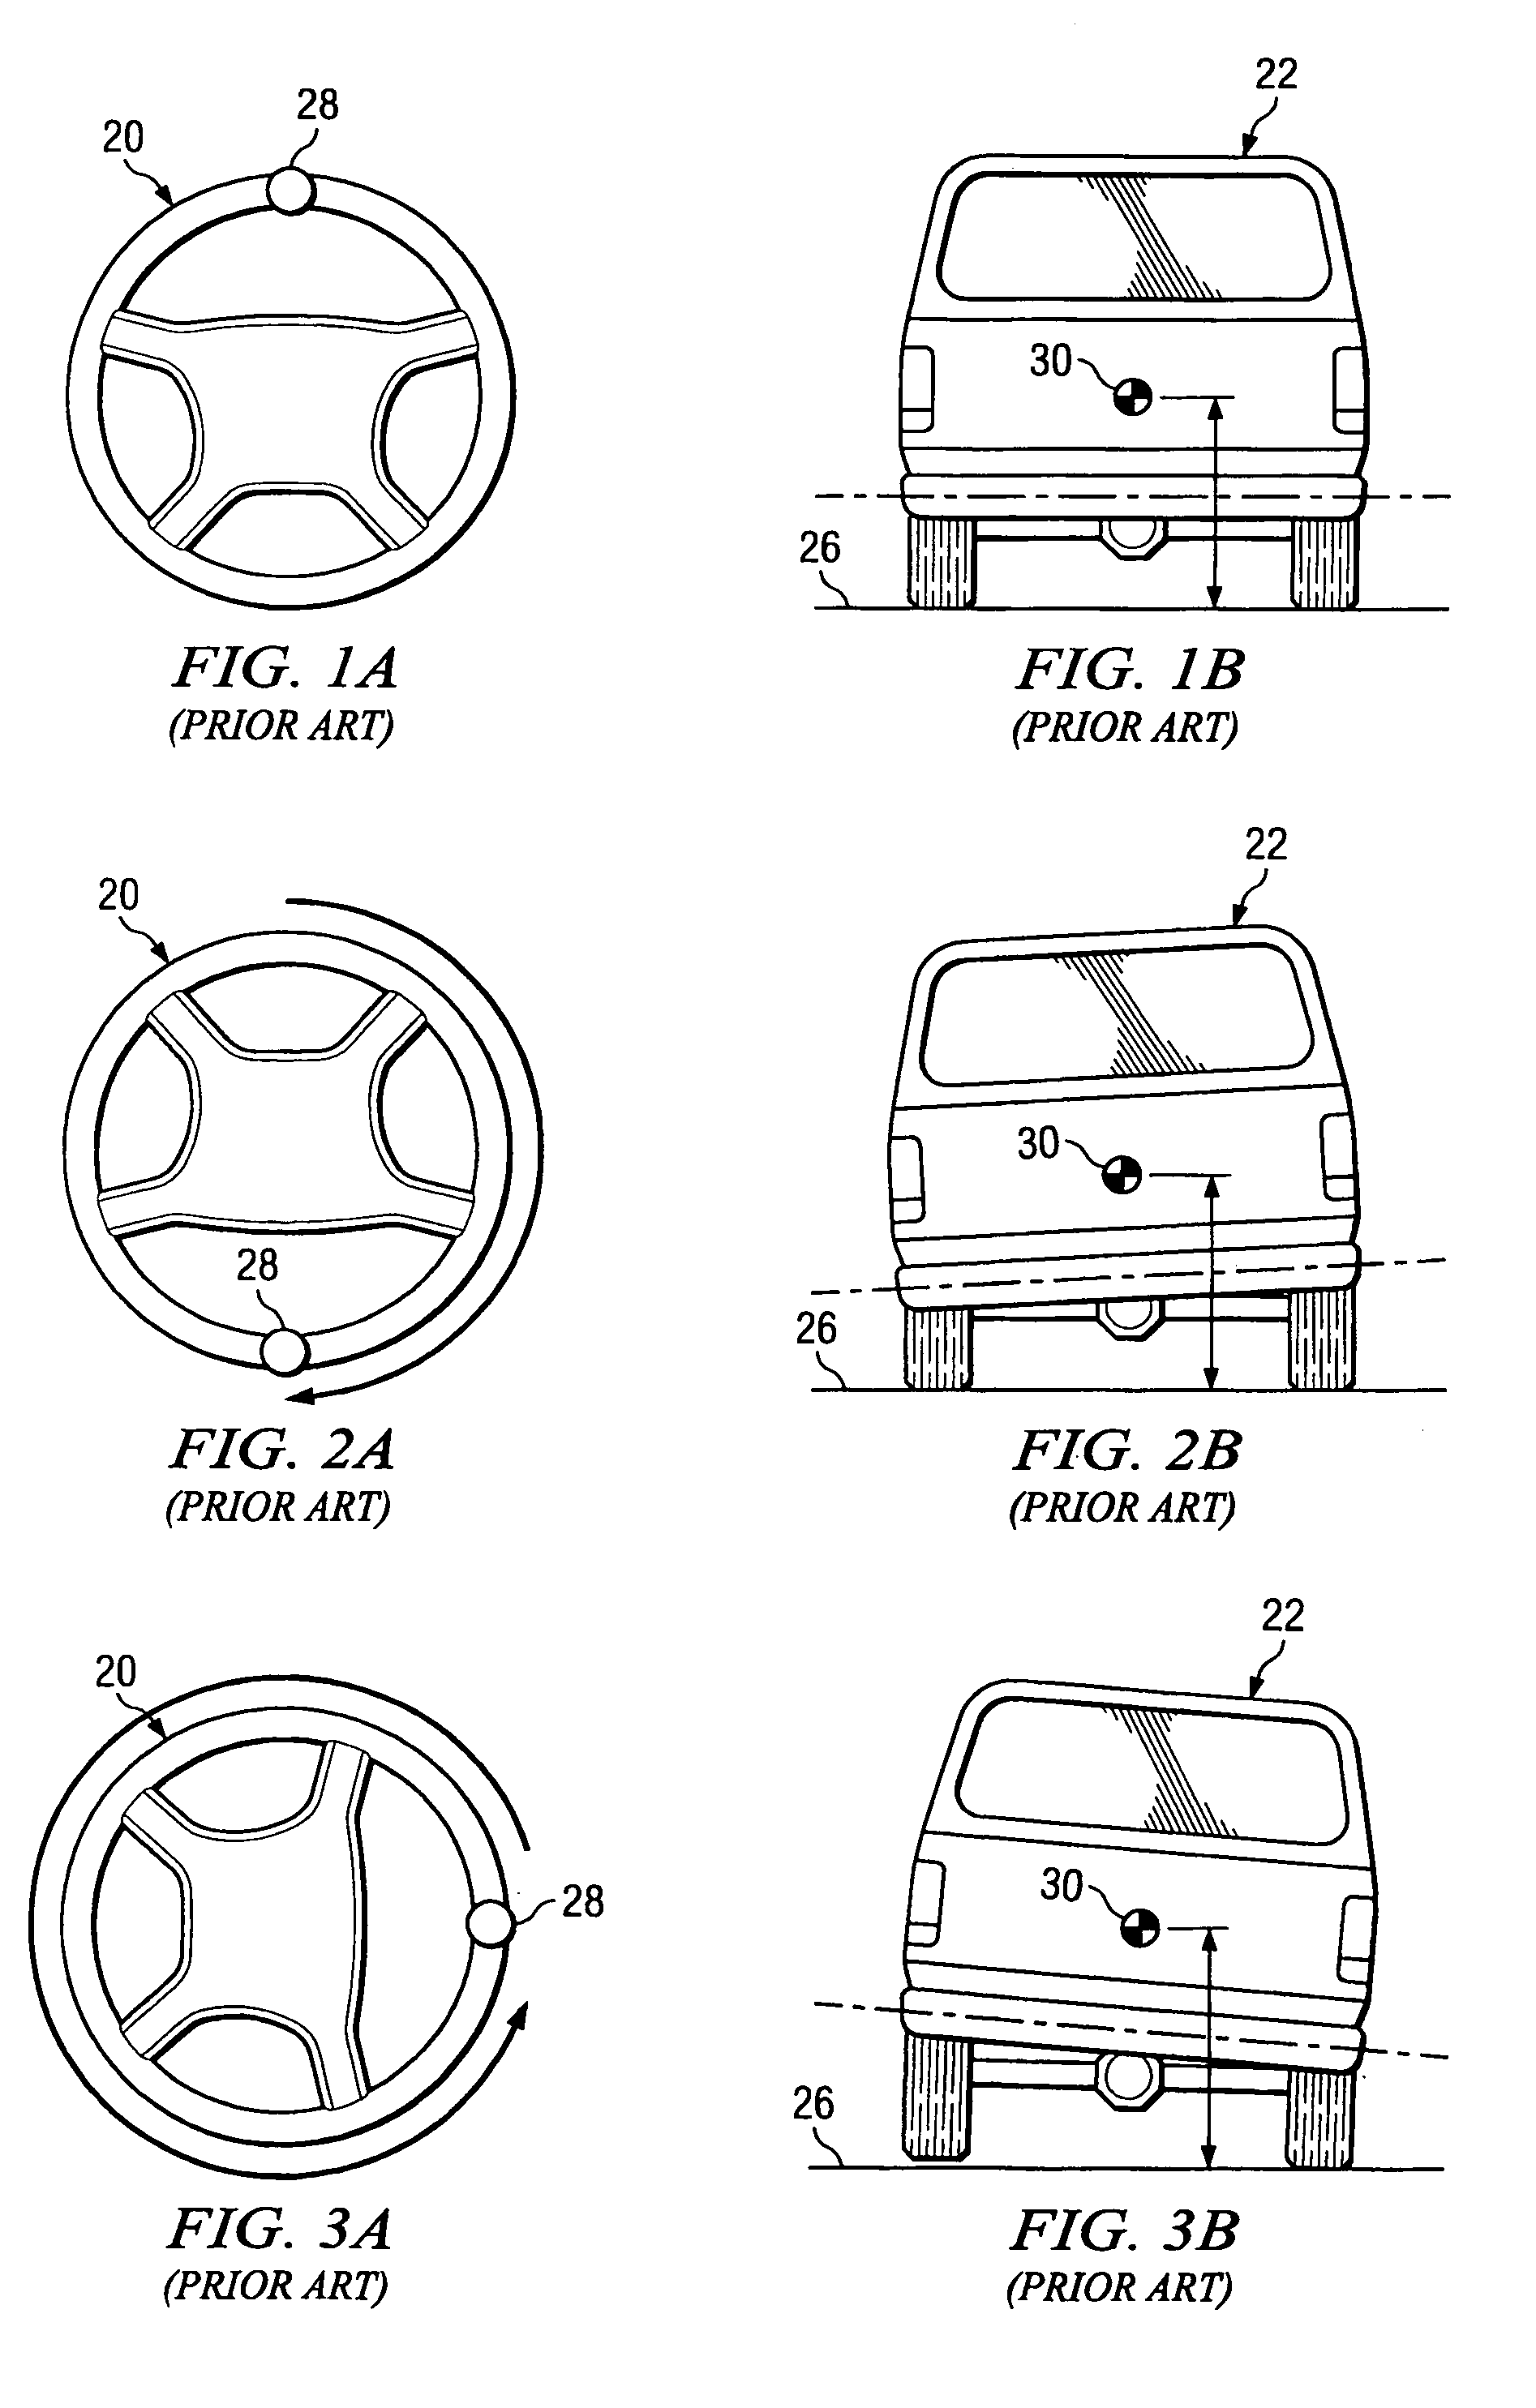 Methods of improving stability of a vehicle using a vehicle stability control system